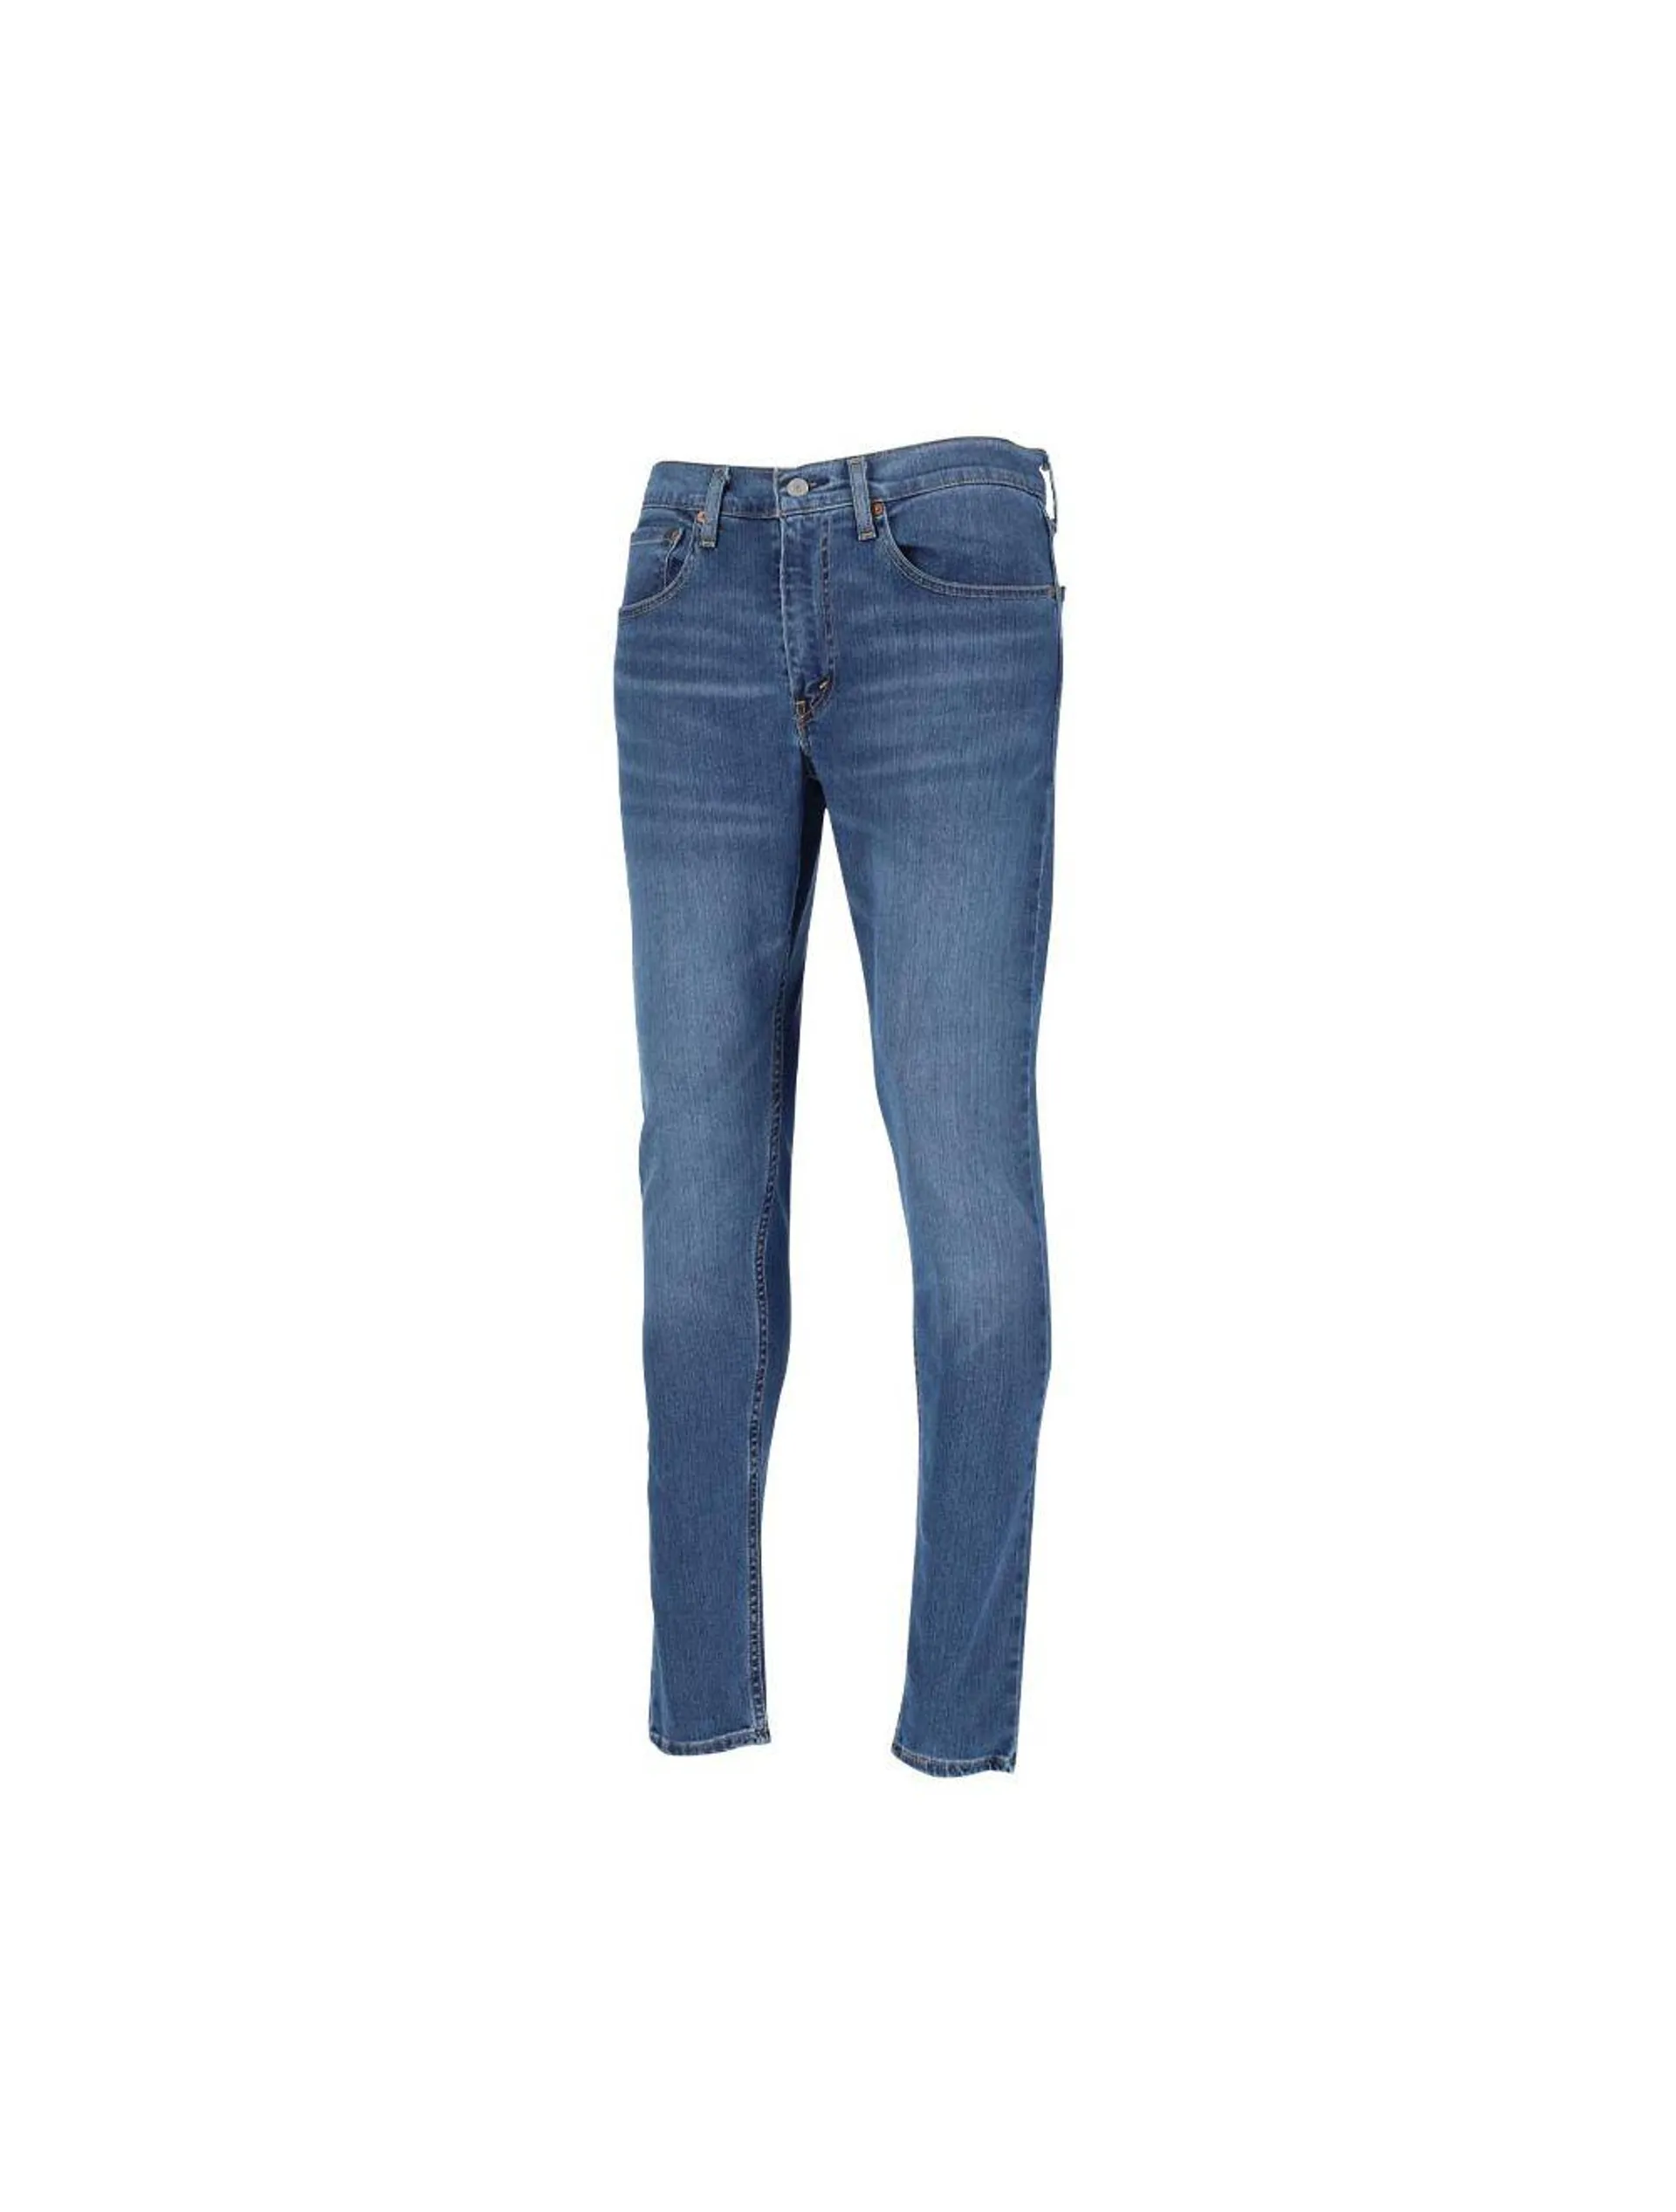 Levi's Skinny Tapered Jeans Mens Tuscany Town